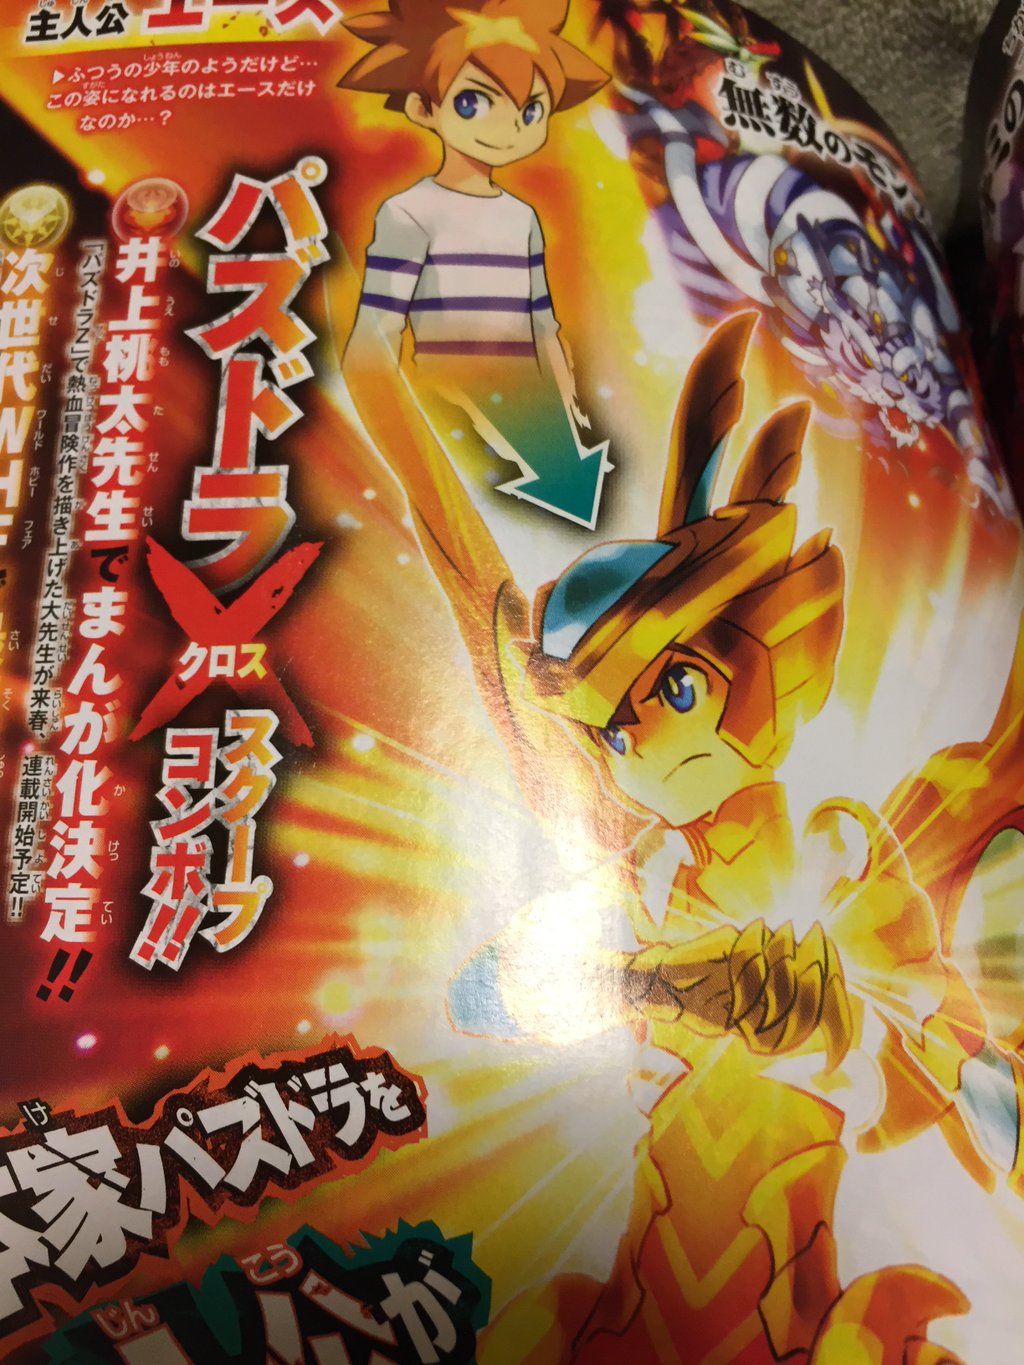 Puzzle  Dragons X announced for 2016 release in Japan  VG247